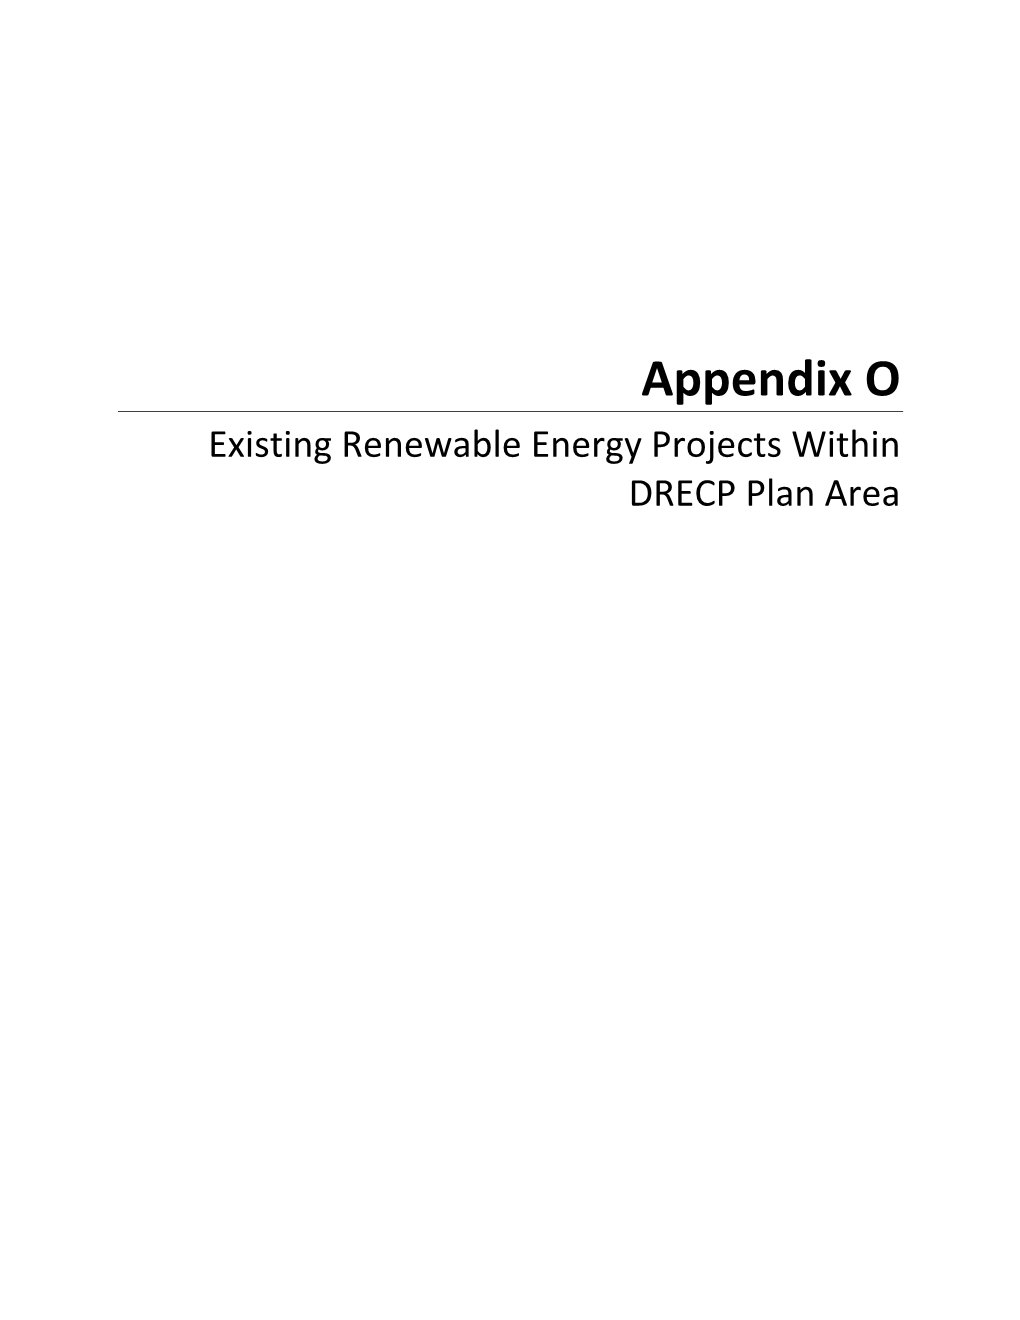 Appendix O, Existing Renewable Energy Projects Within DRECP